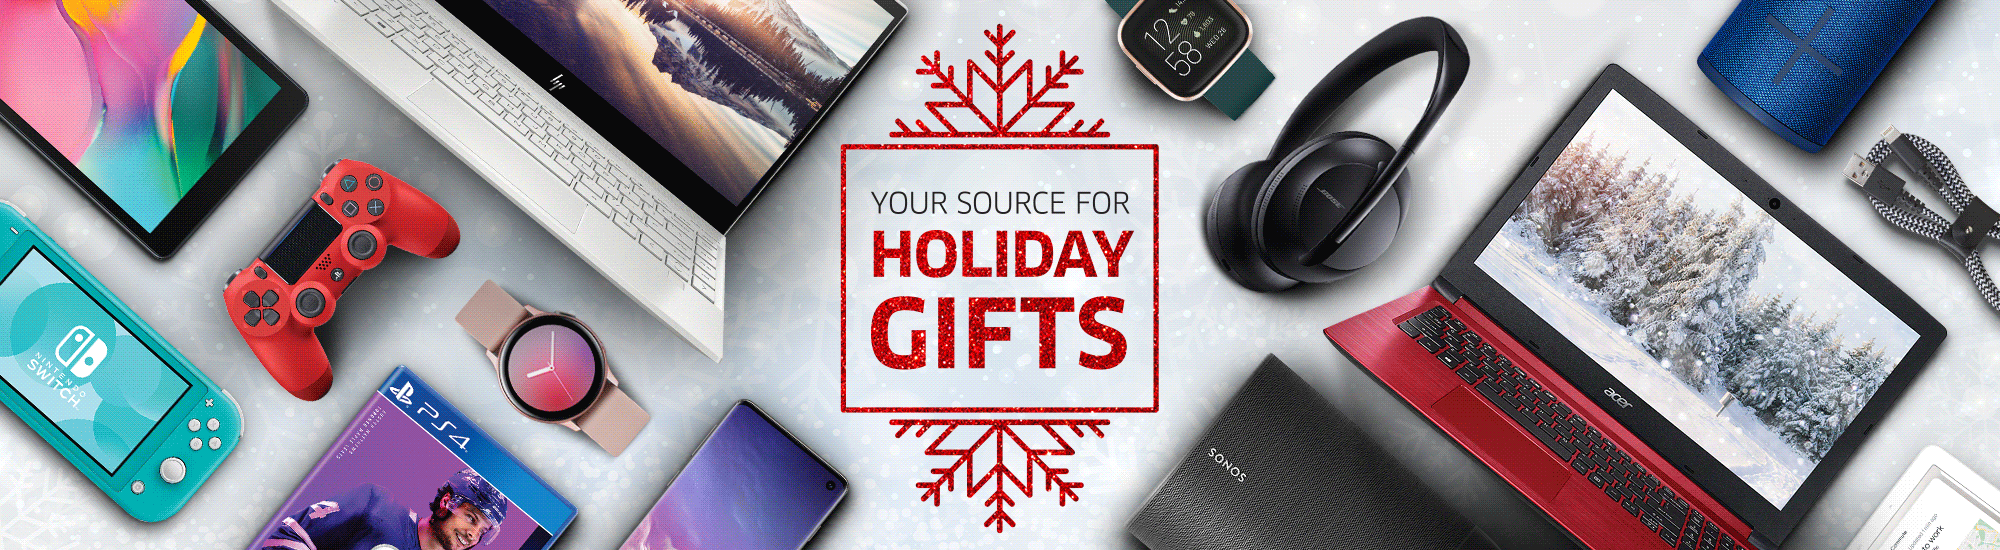 YOUR SOURCE FOR HOLIDAY GIFTS